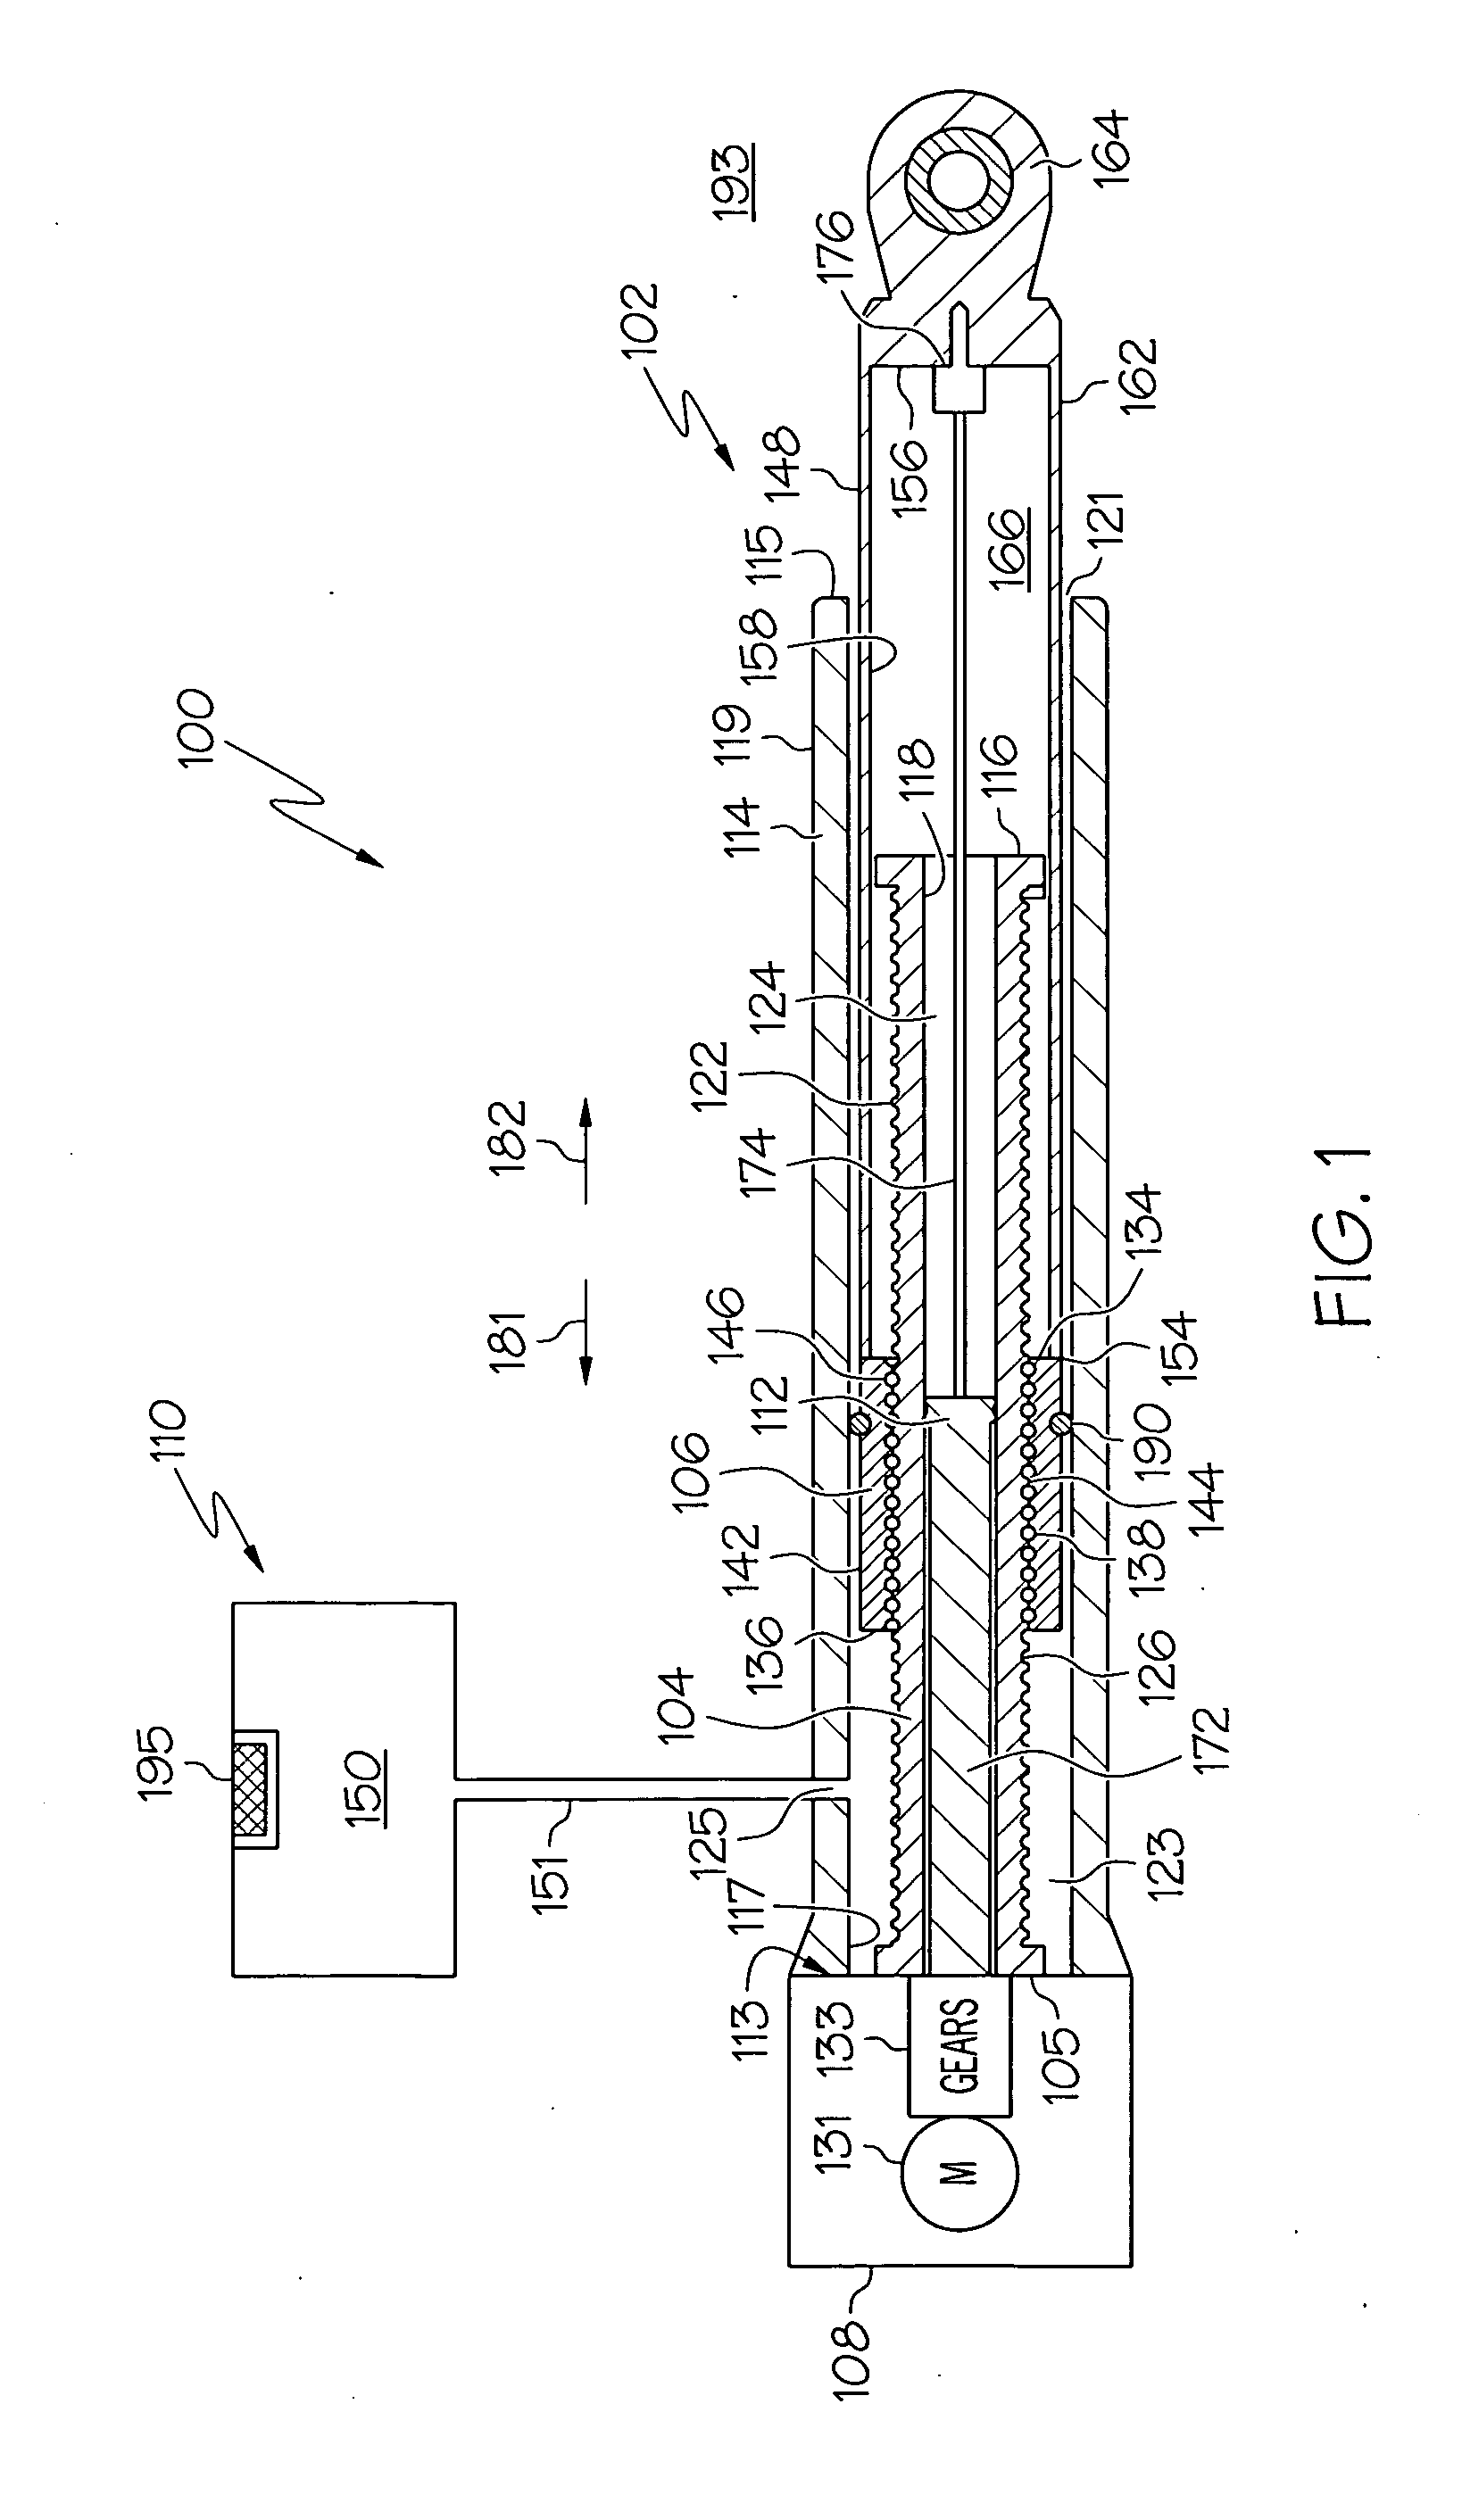 Electromechanical linear actuator including an environmental control and air management system